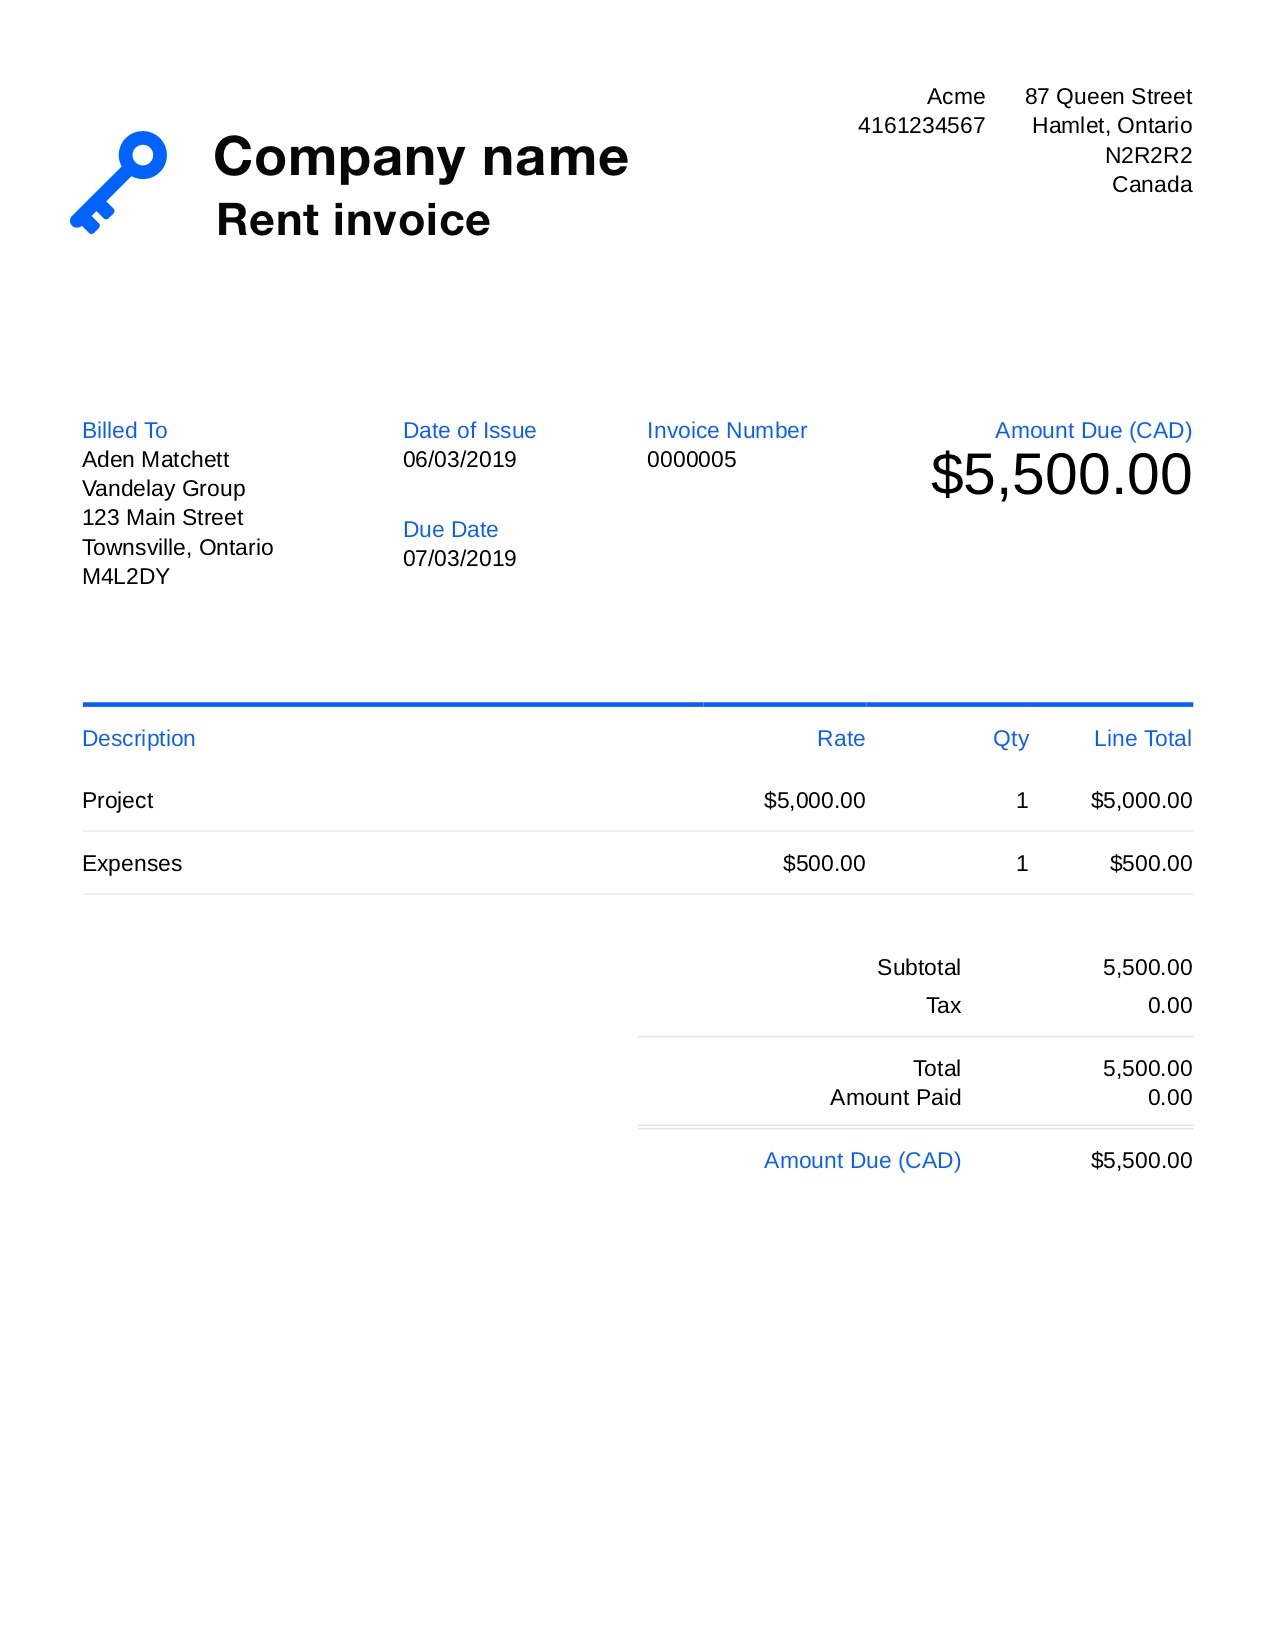 Free Rent Invoice Template. Customize And Send In 90 Seconds With Monthly Rent Invoice Template